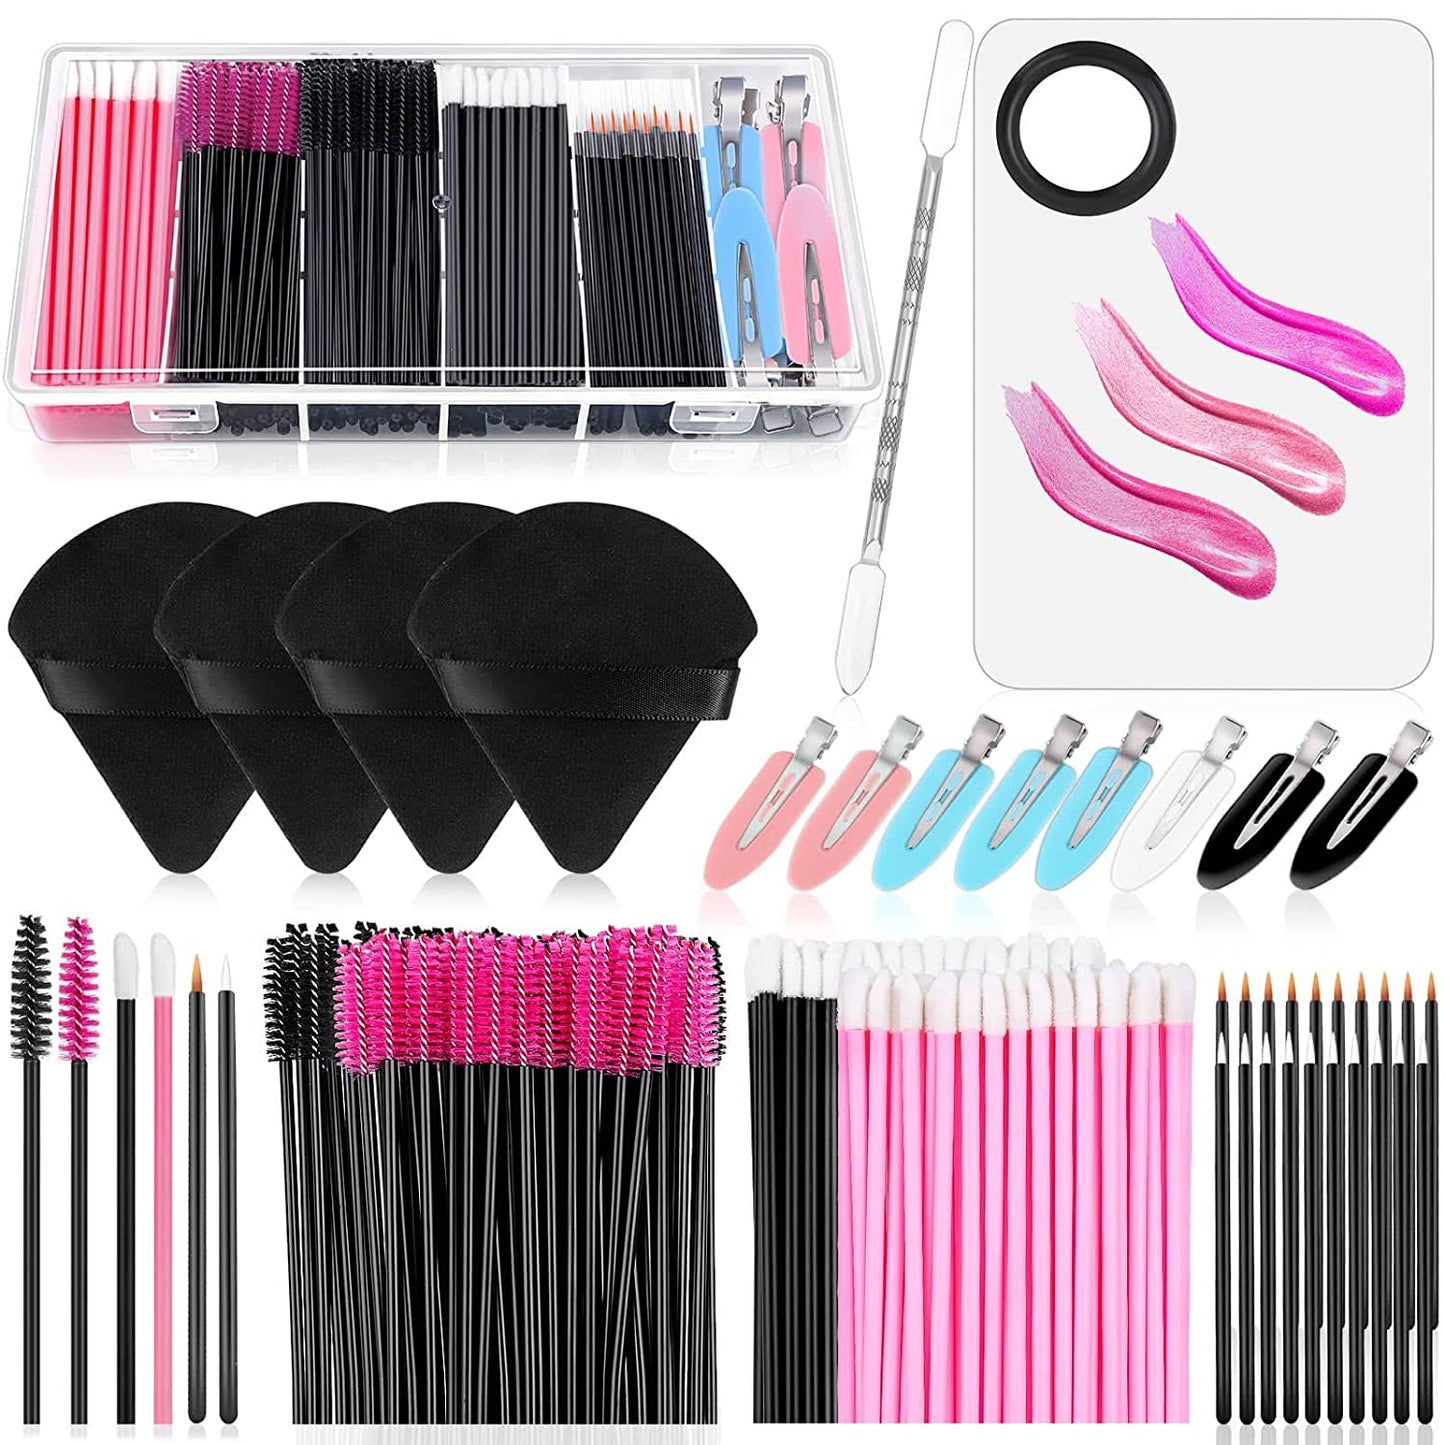 Disposable Makeup Applicators Kit with Triangle Puff Mixing Palette, Artist Supplies Disposable Mascara Wands, Lip Brushes, Hair Clips Powder Puffs for Face with Storage Box